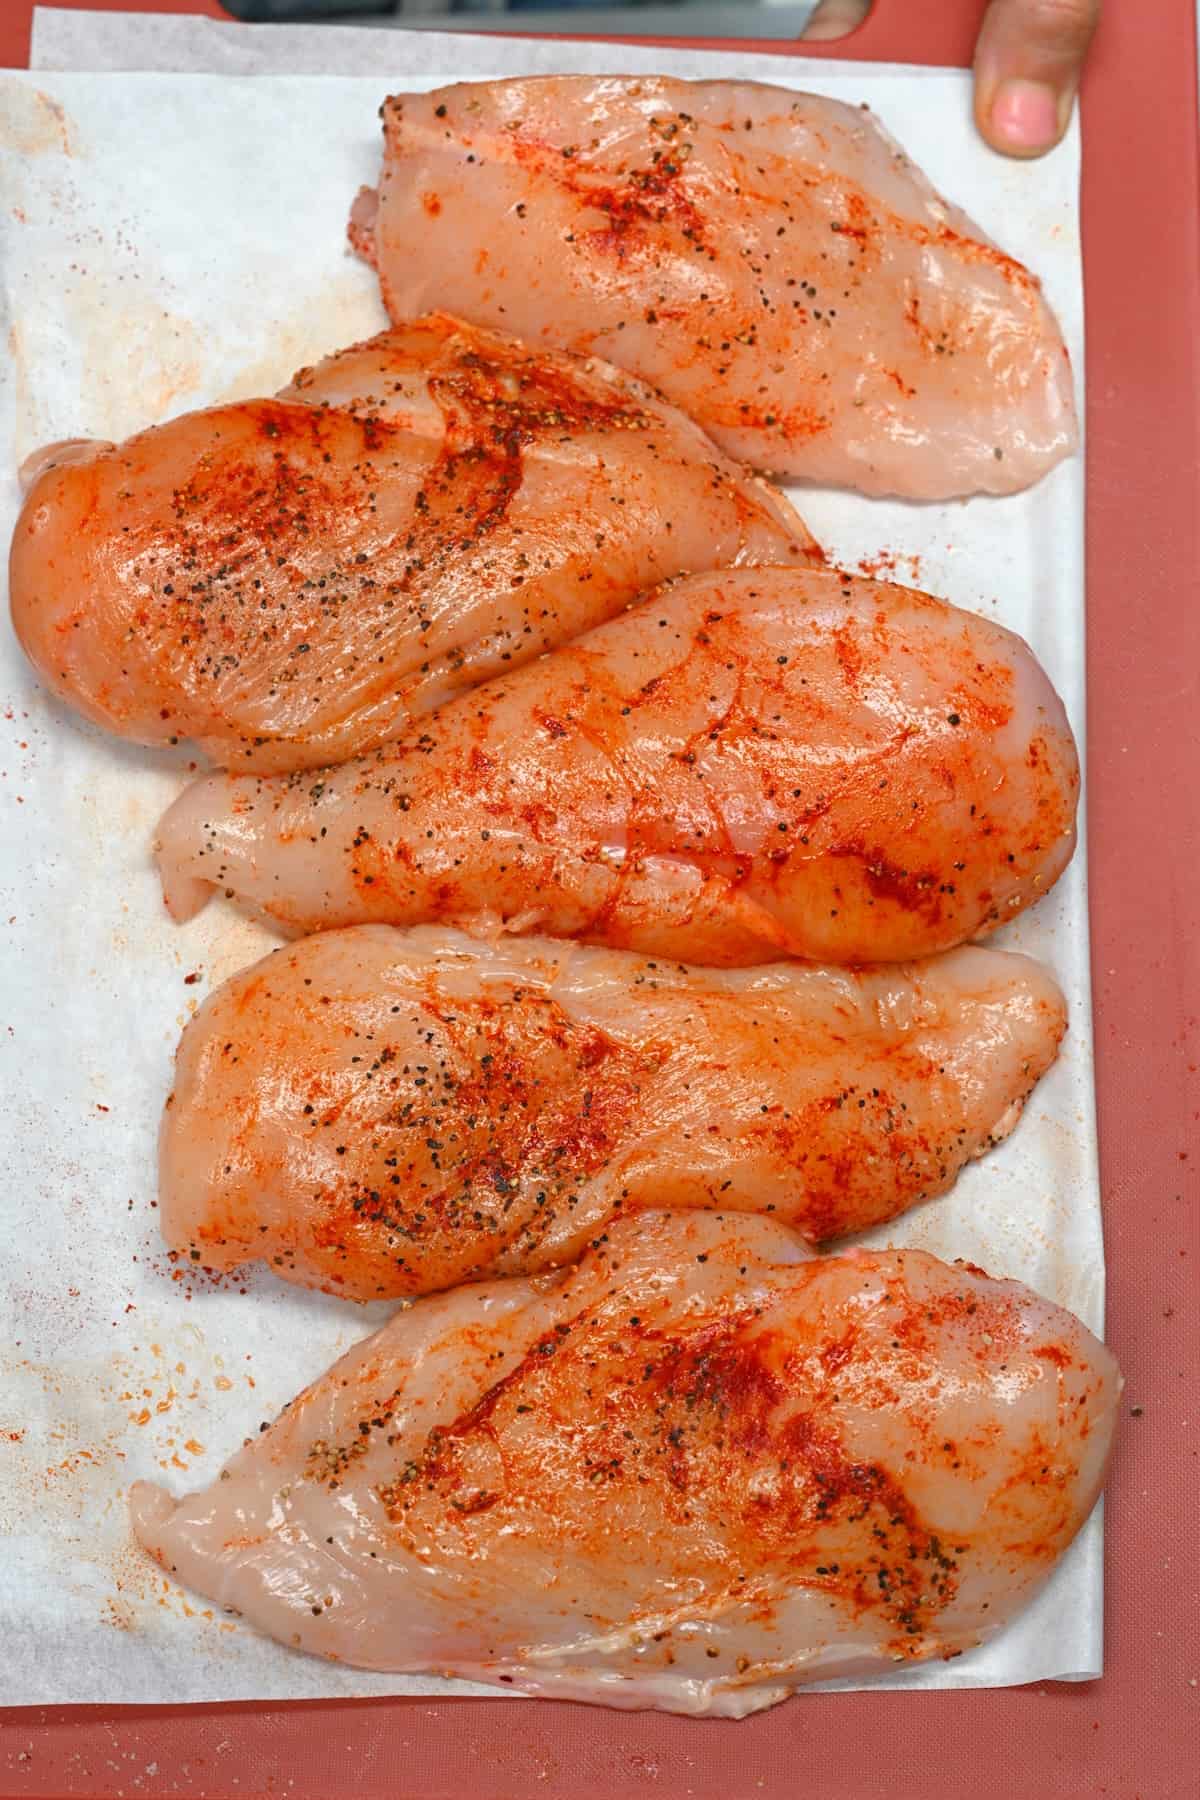 Chicken breasts rubbed with spices